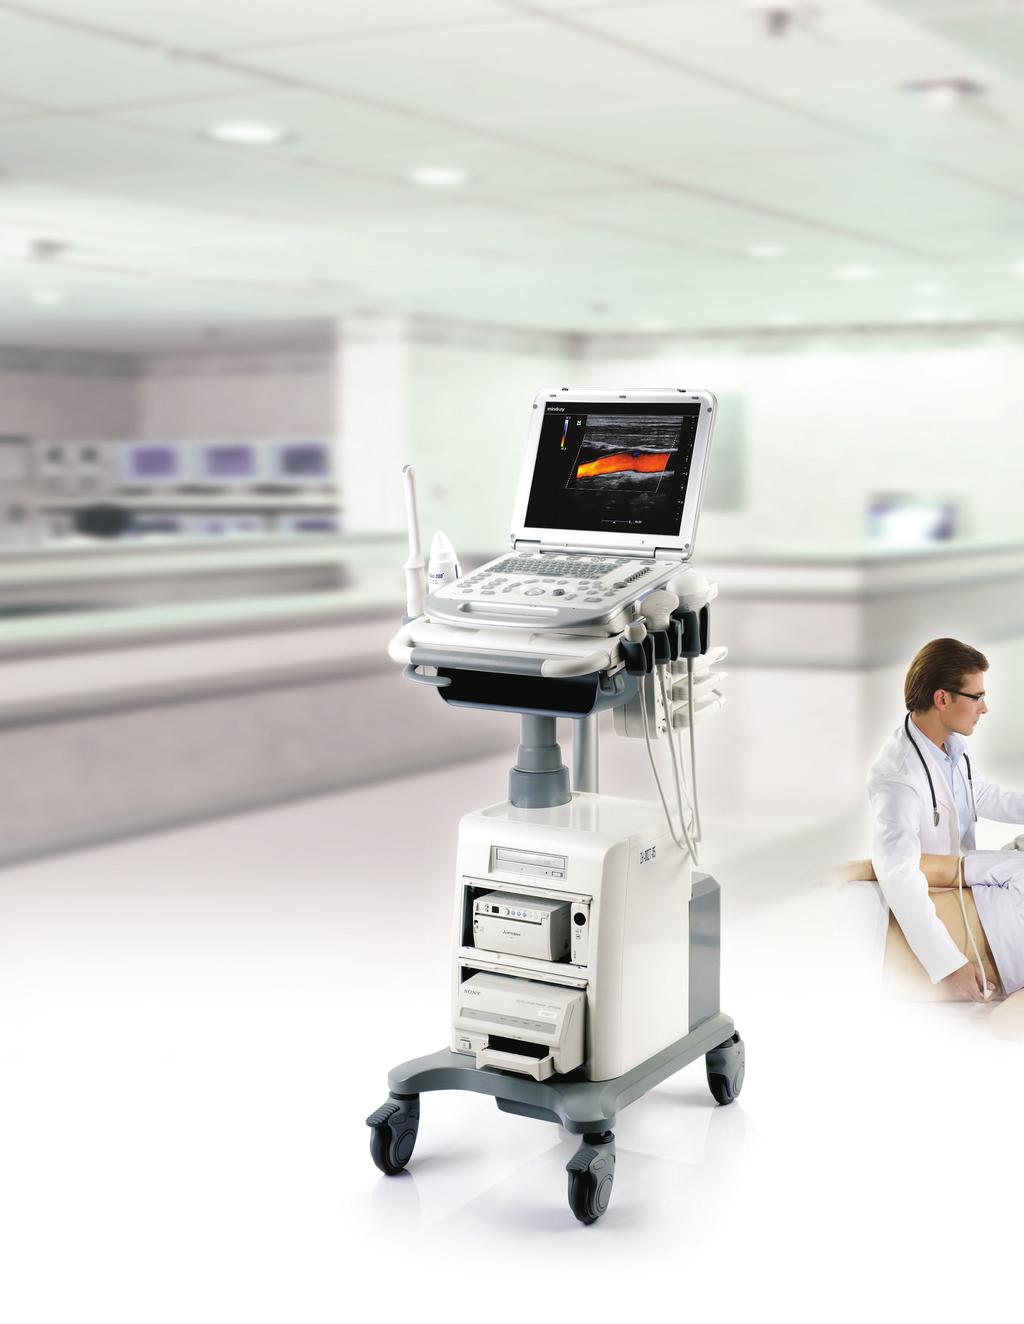 M7 Hand-carried Ultrasound System Equipped for